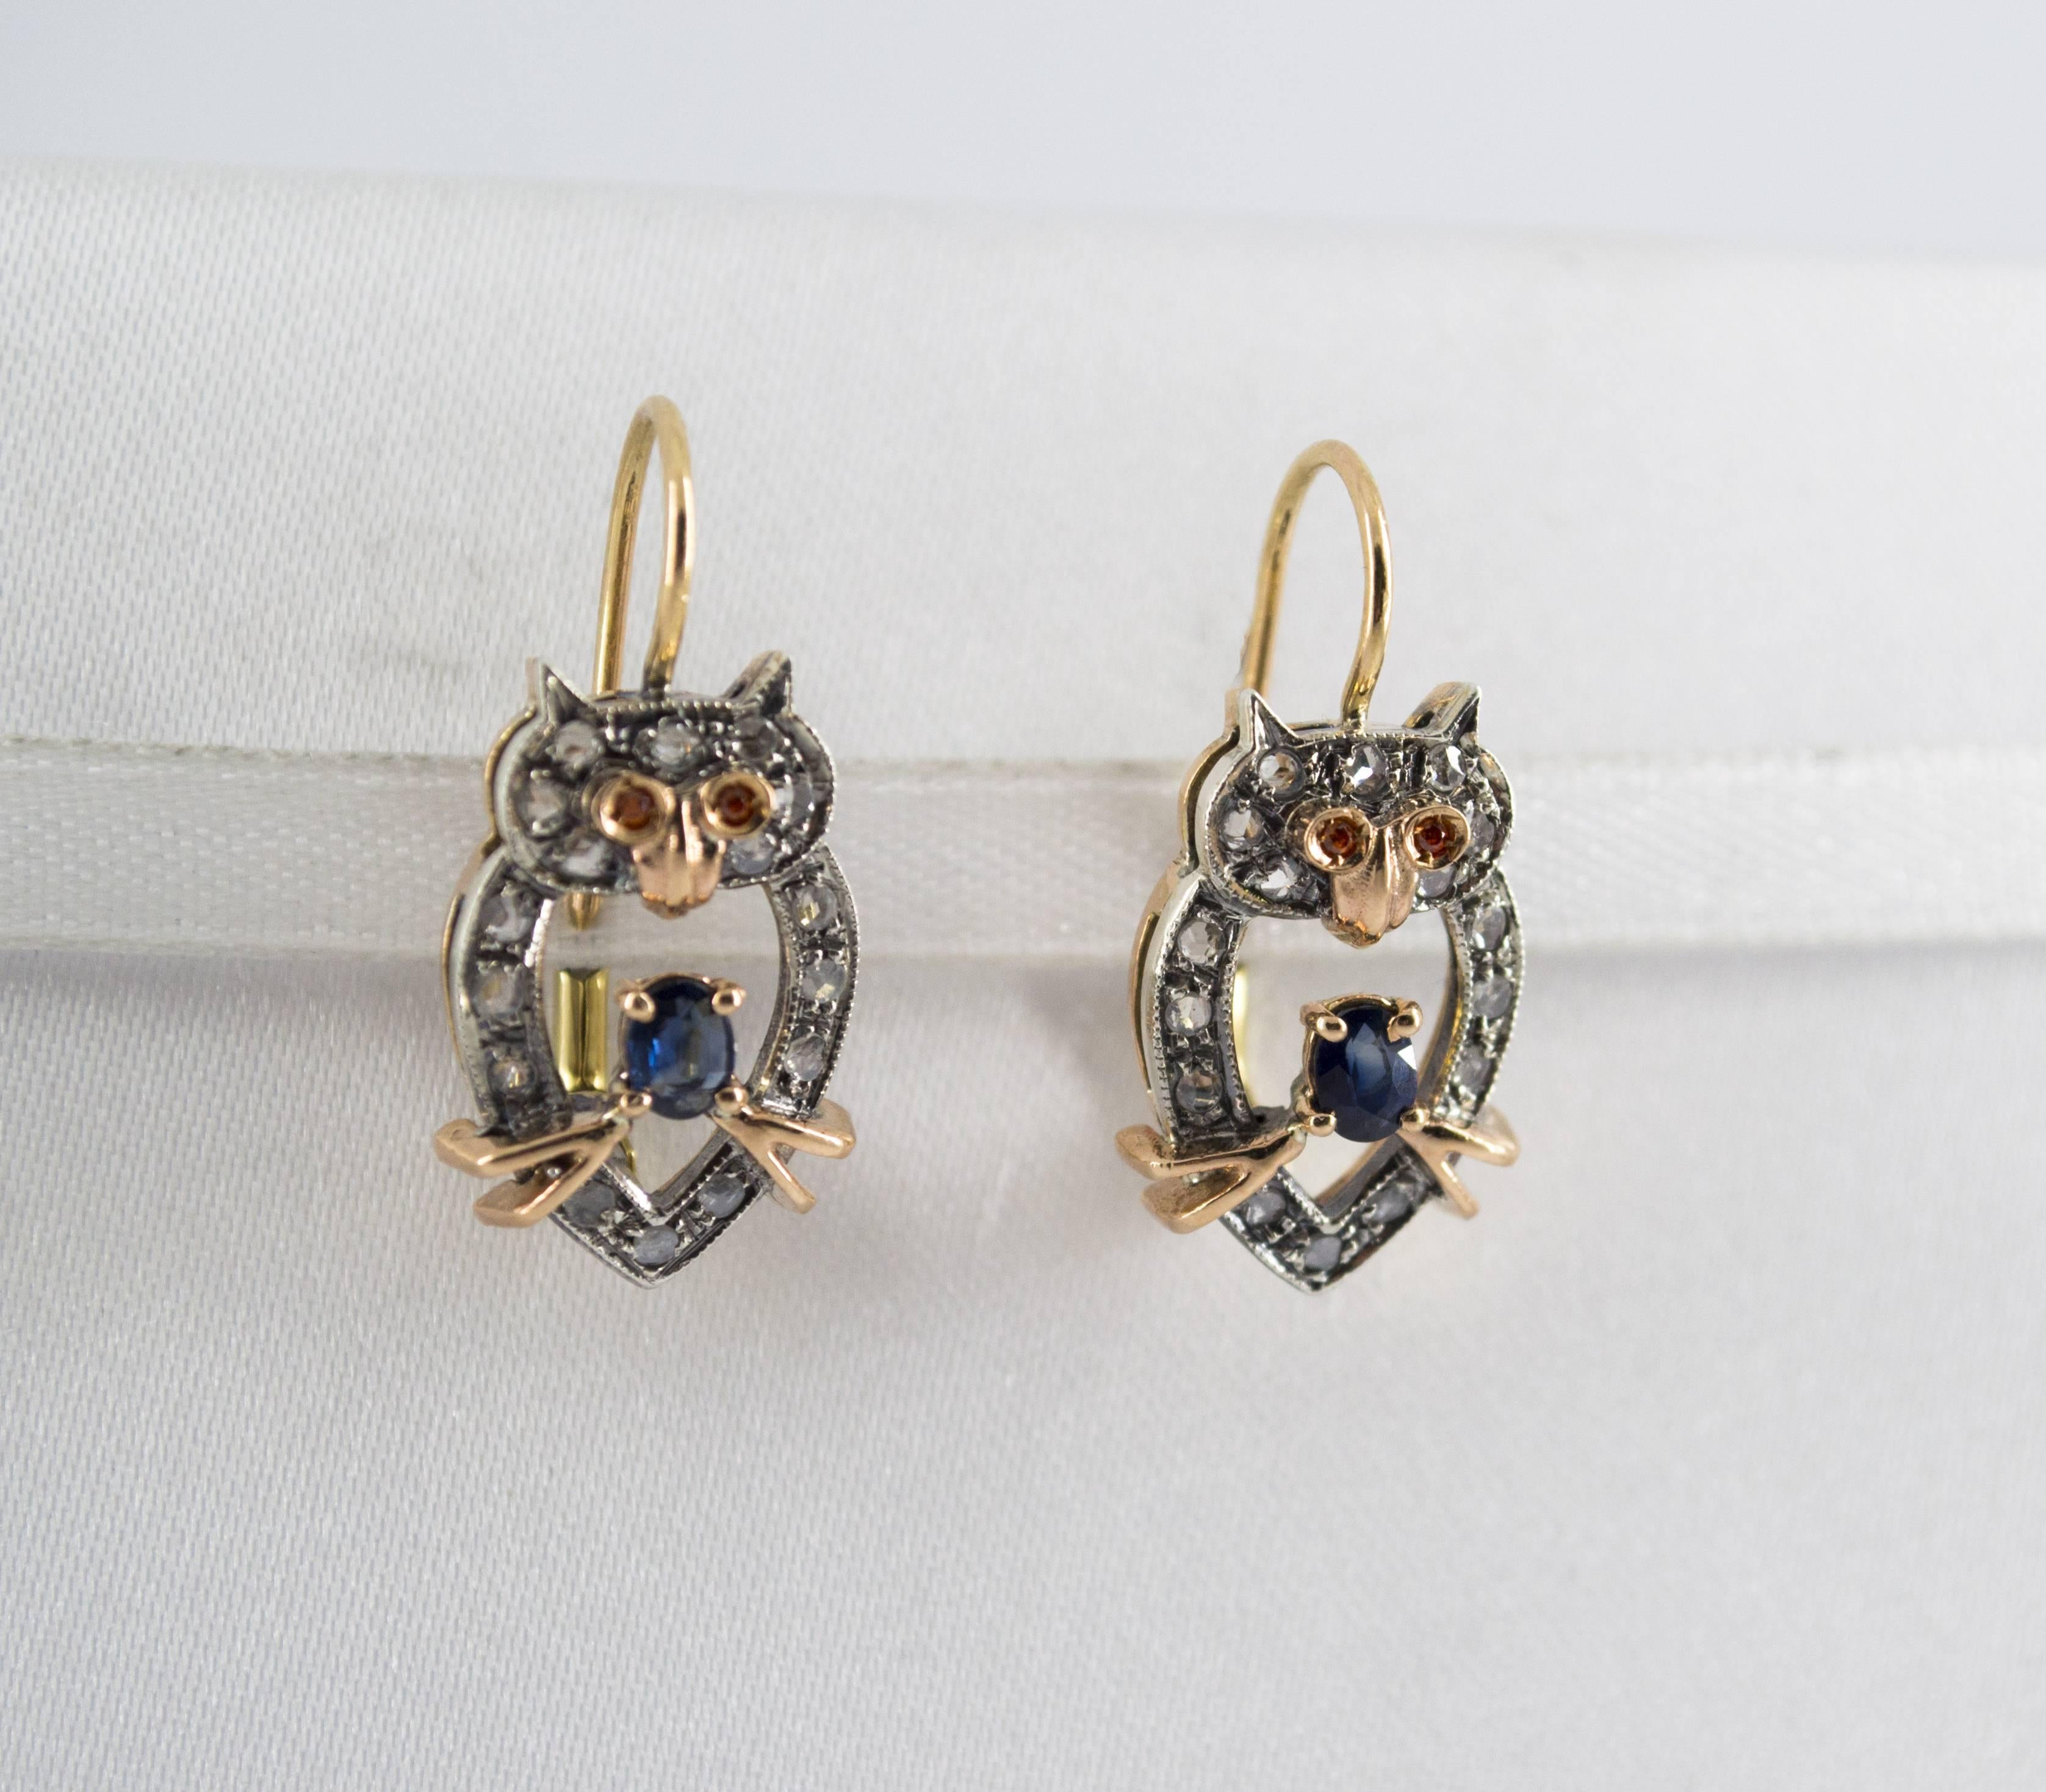 These Earrings are made of 9K Yellow Gold and Sterling Silver.
These Earrings have 0.20 Carats of White Rose Cut Diamonds.
These Earrings have 0.02 Carats of Rubies.
These Earrings have 0.50 Carats of Blue Sapphires.
They're also available with